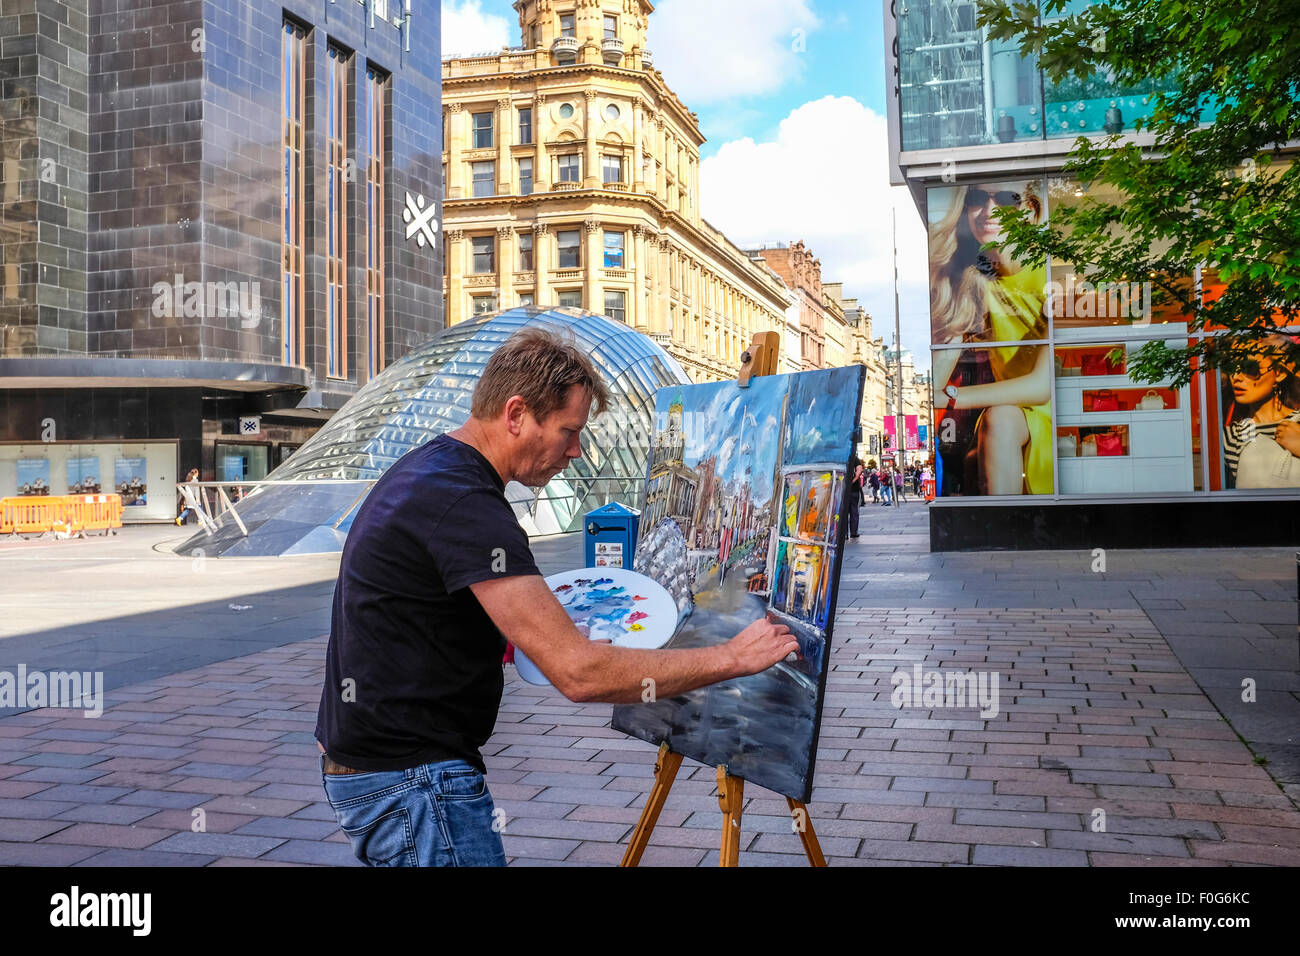 Glasgow, Scotland, UK. 15th Aug, 2015. Almost 150 artists came to Glasgow to take part in the "Rapid Painter" art competition with the aim being to make a painting capturing the spirit of Glasgow city, completed in 1 day. The artists attracted a lot of curiosity and interest from tourists and locals, when they set up in various locations about the city. All the completed works will go on exhibition on Sunday 16 August at the Royal Concert Hall, Sauchiehall Street, Glasgow when many of the paintings will be for sale. Credit:  Findlay/Alamy Live News Stock Photo